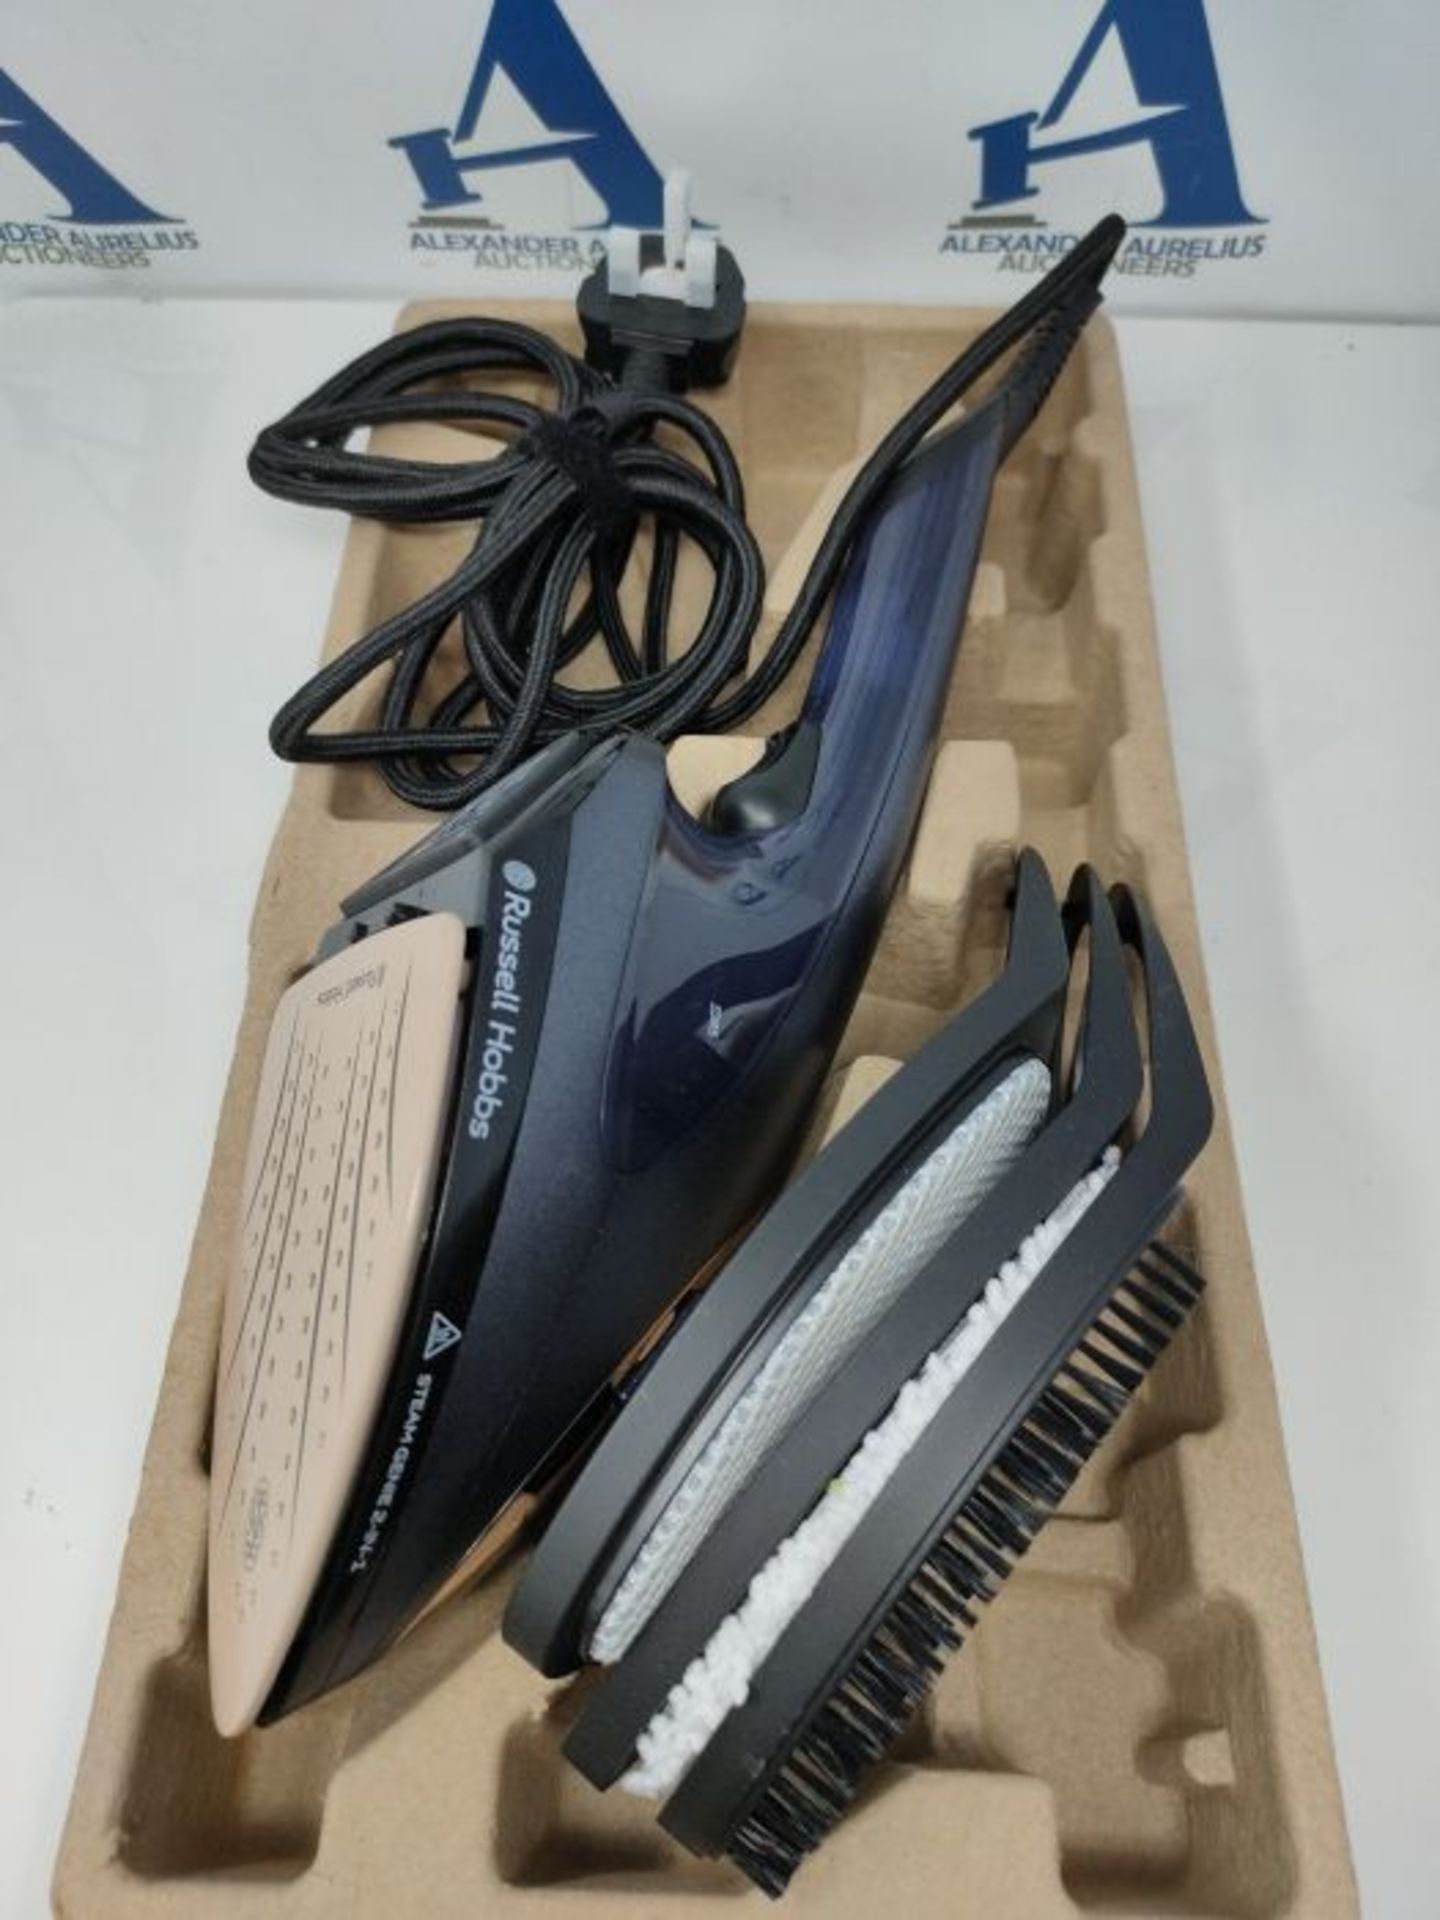 Russell Hobbs 28370 Steam Genie 2-In-1 Hand Held Clothes Steamer - Handheld Gament Ste - Image 3 of 3